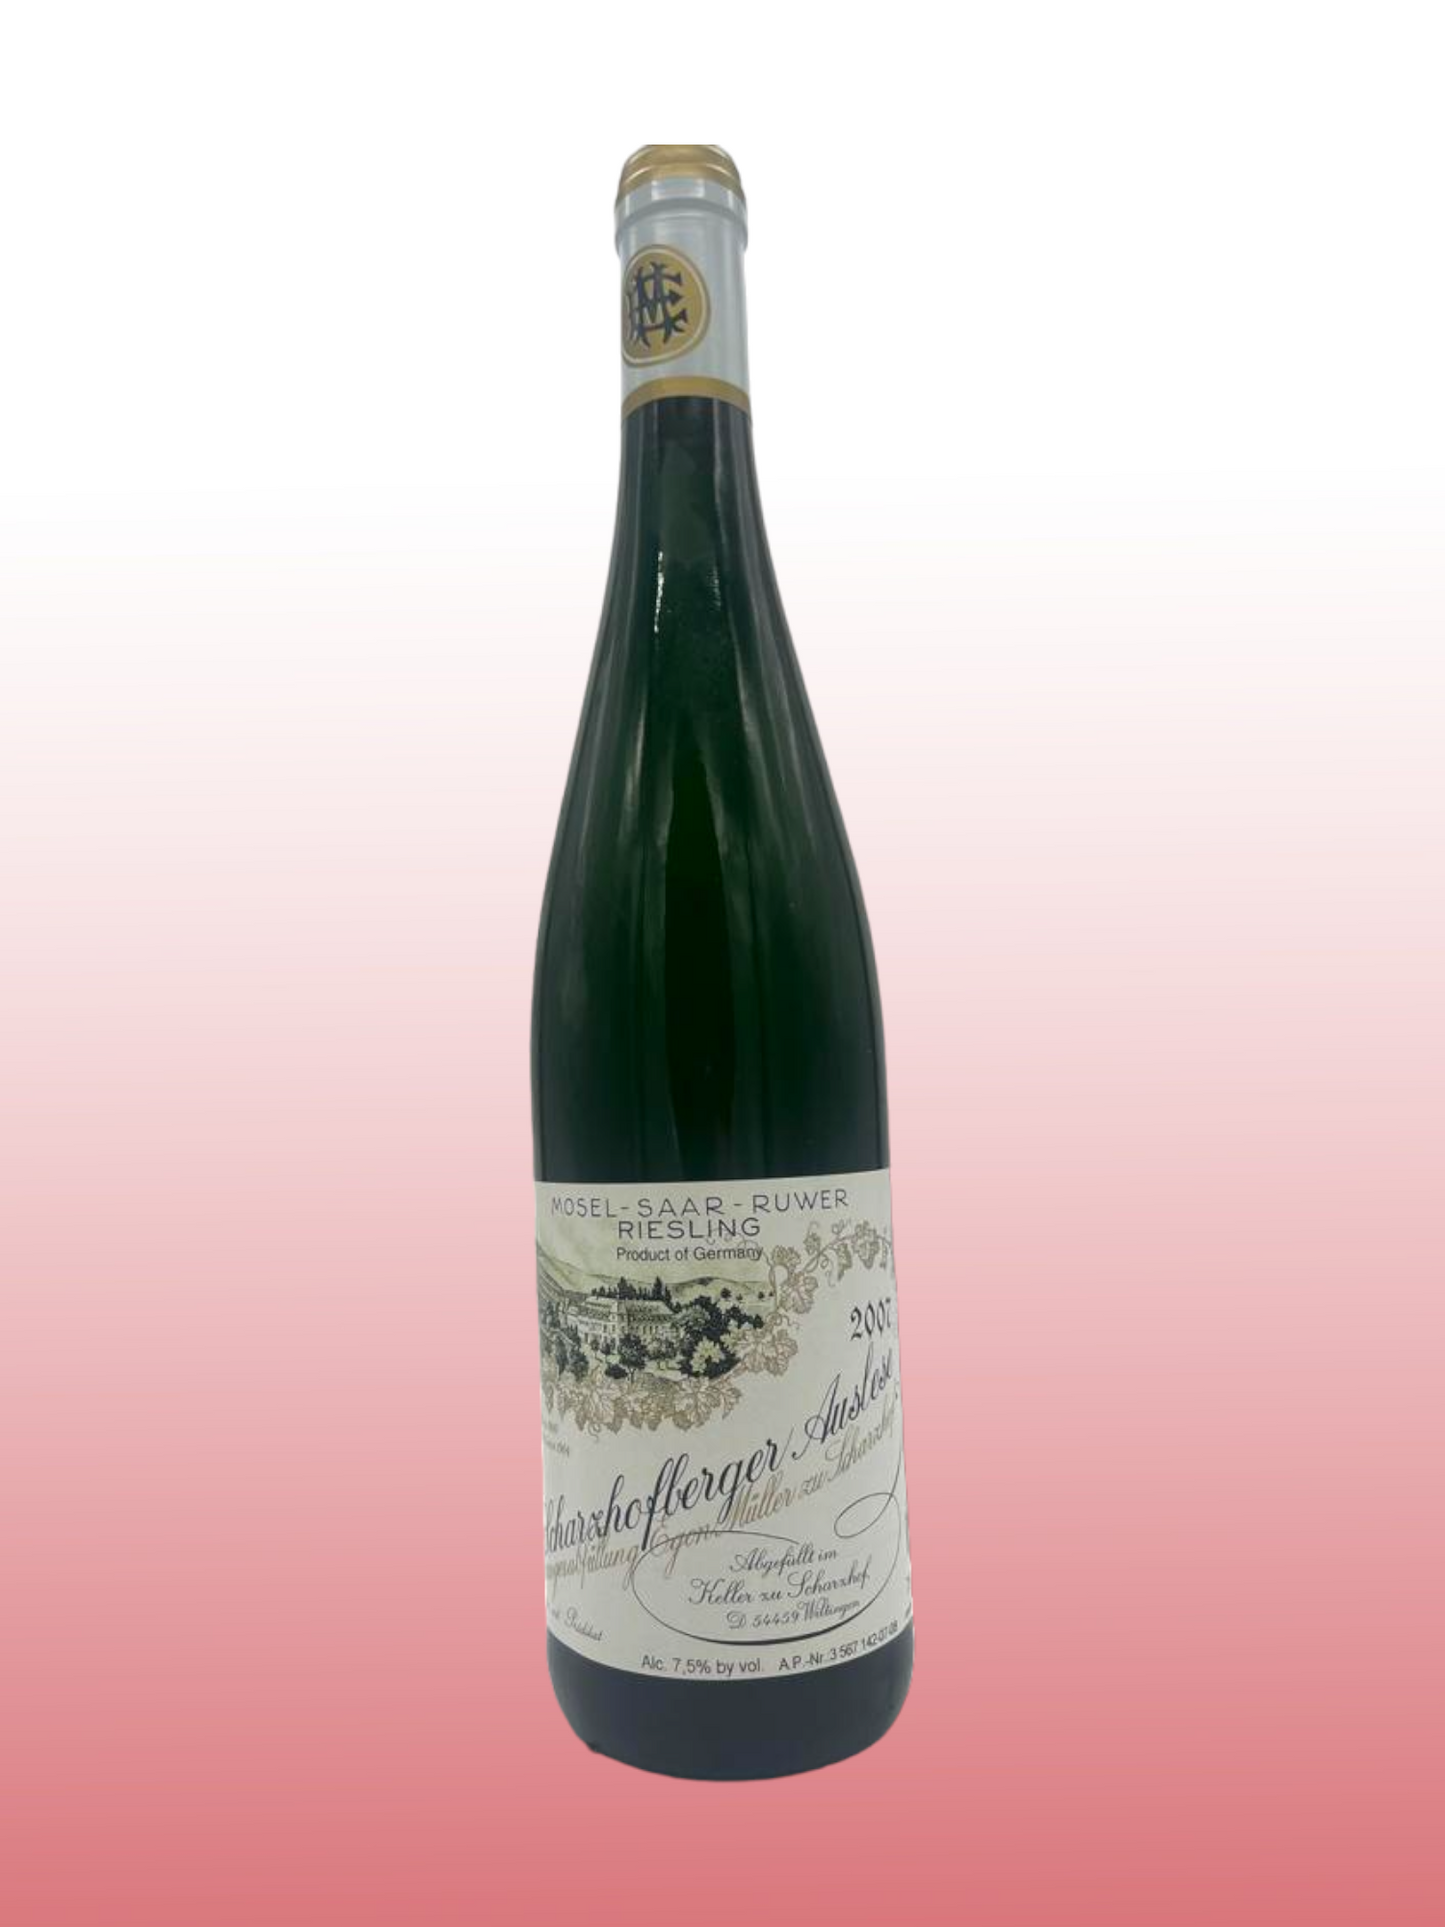 2007 Scharzhofberger Riesling Auslese
